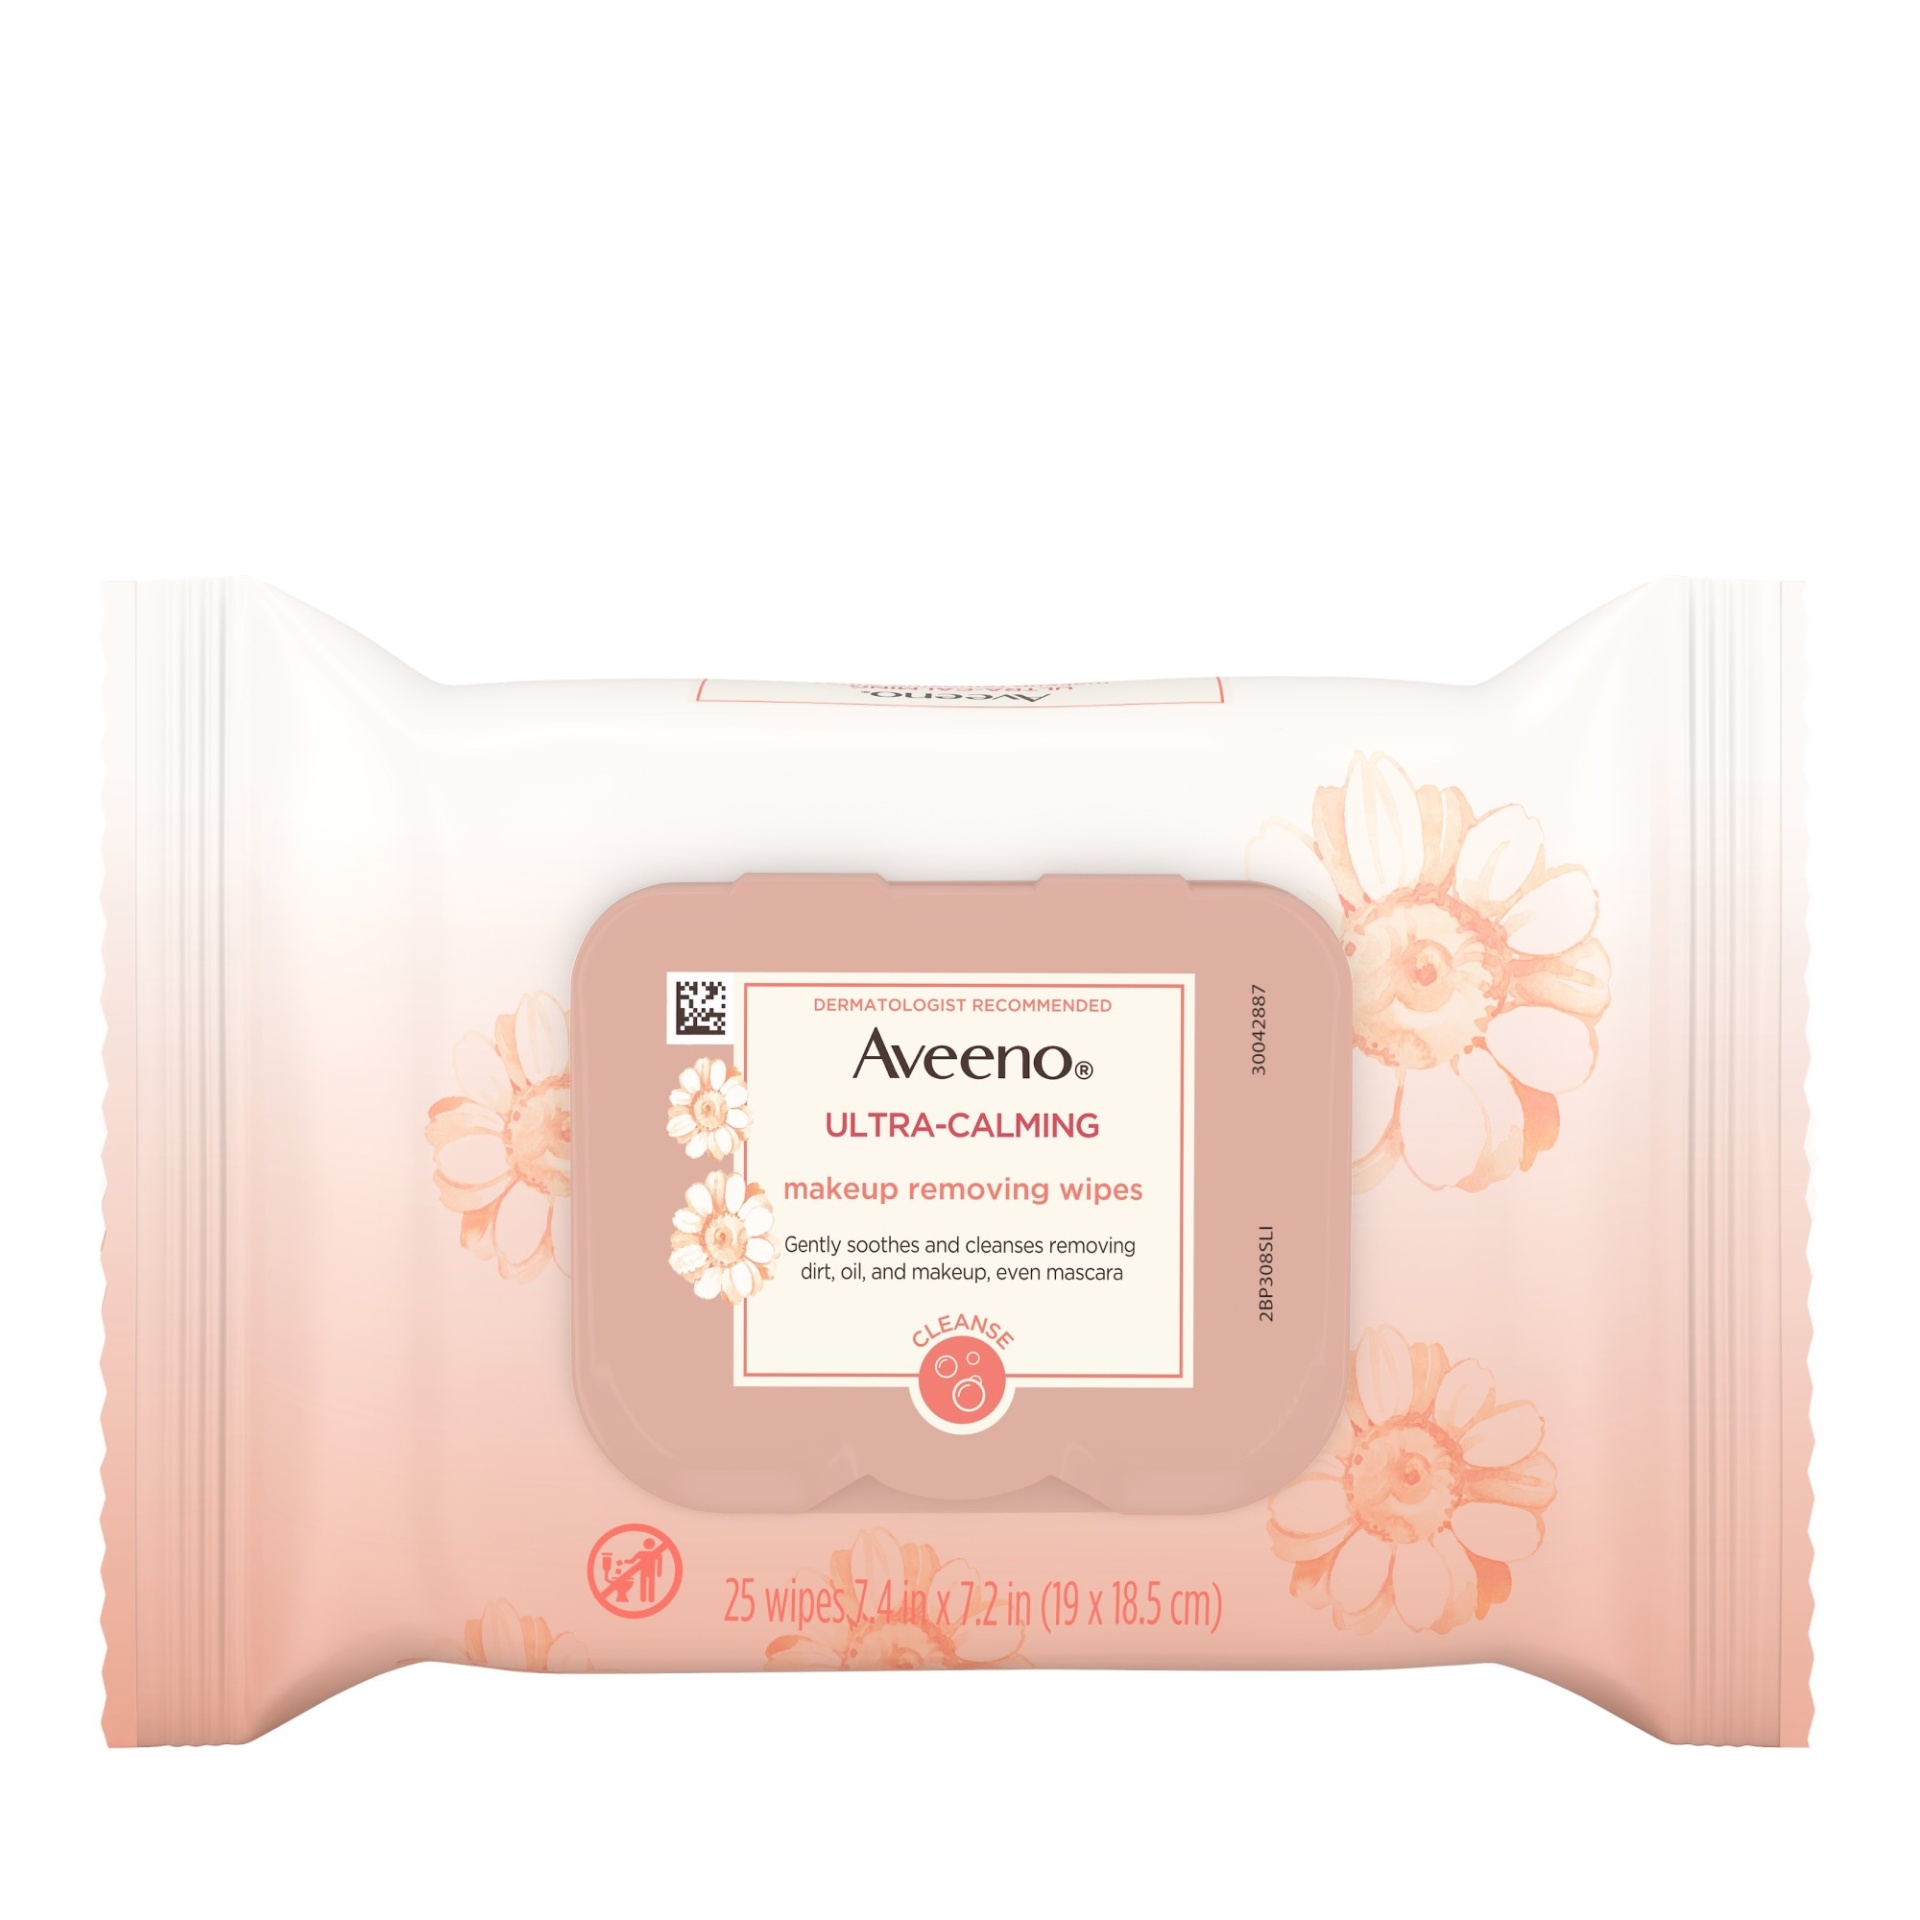 slide 1 of 6, Aveeno Ultra-Calming Makeup Removing Facial Cleansing Wipes with Calming Feverfew Extract, Oil-Free Soothing Face Wipes for Sensitive Skin, Nourishing, Gentle & Non-Comedogenic, 25 ct